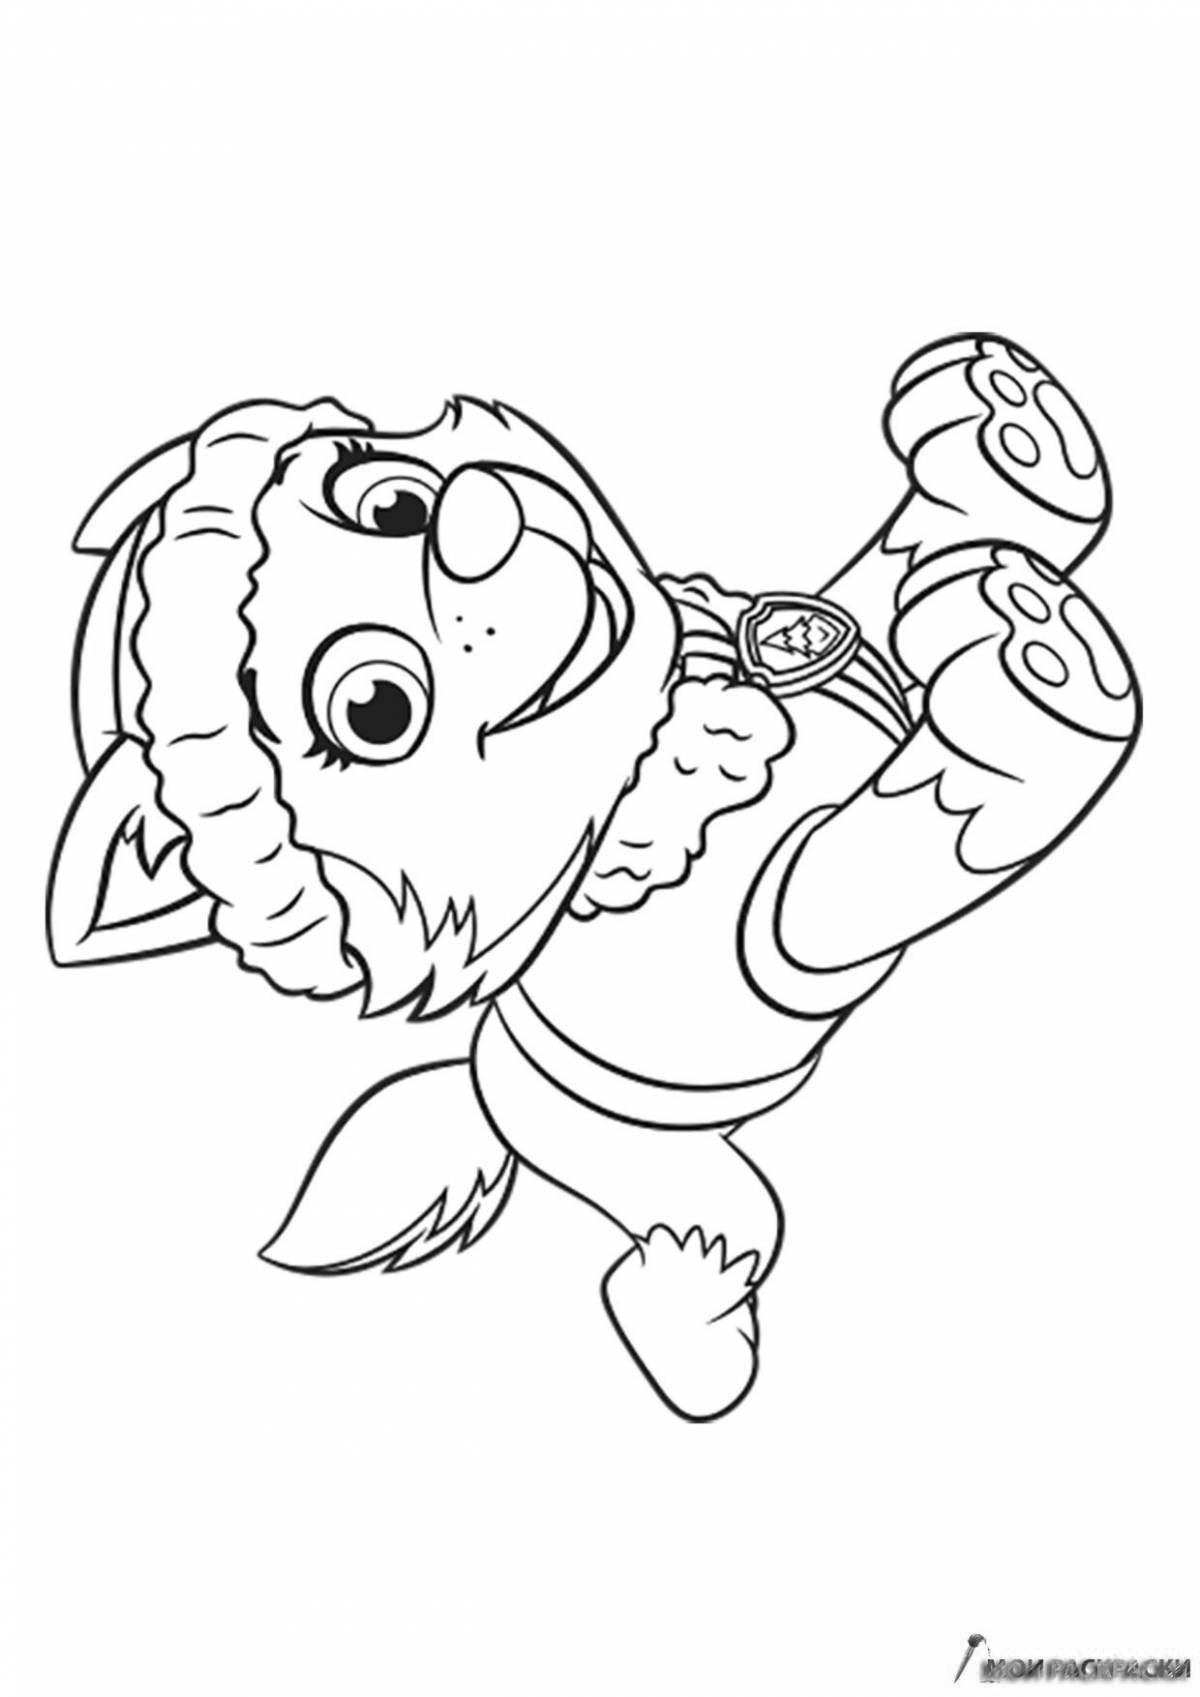 Adorable everest puppy coloring page